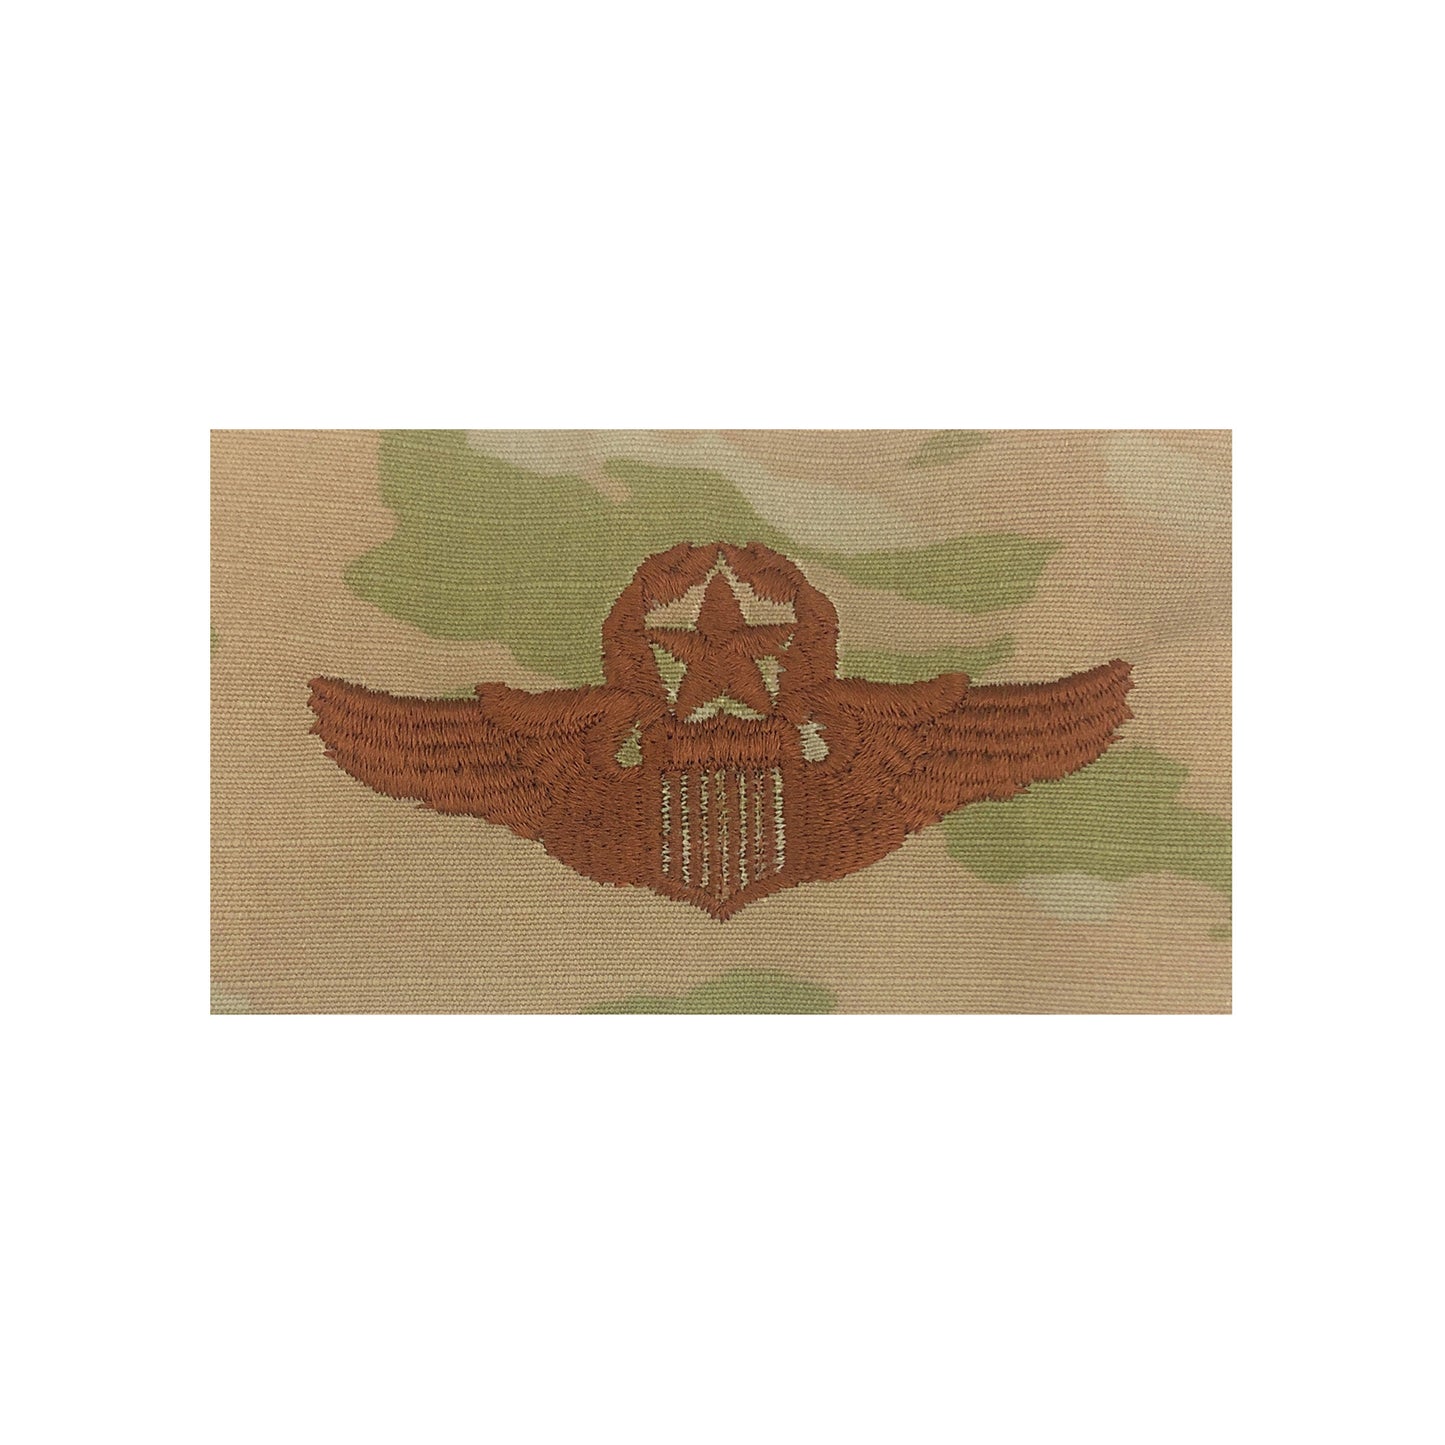 U.S. Air Force Command Pilot OCP Spice Brown Badge